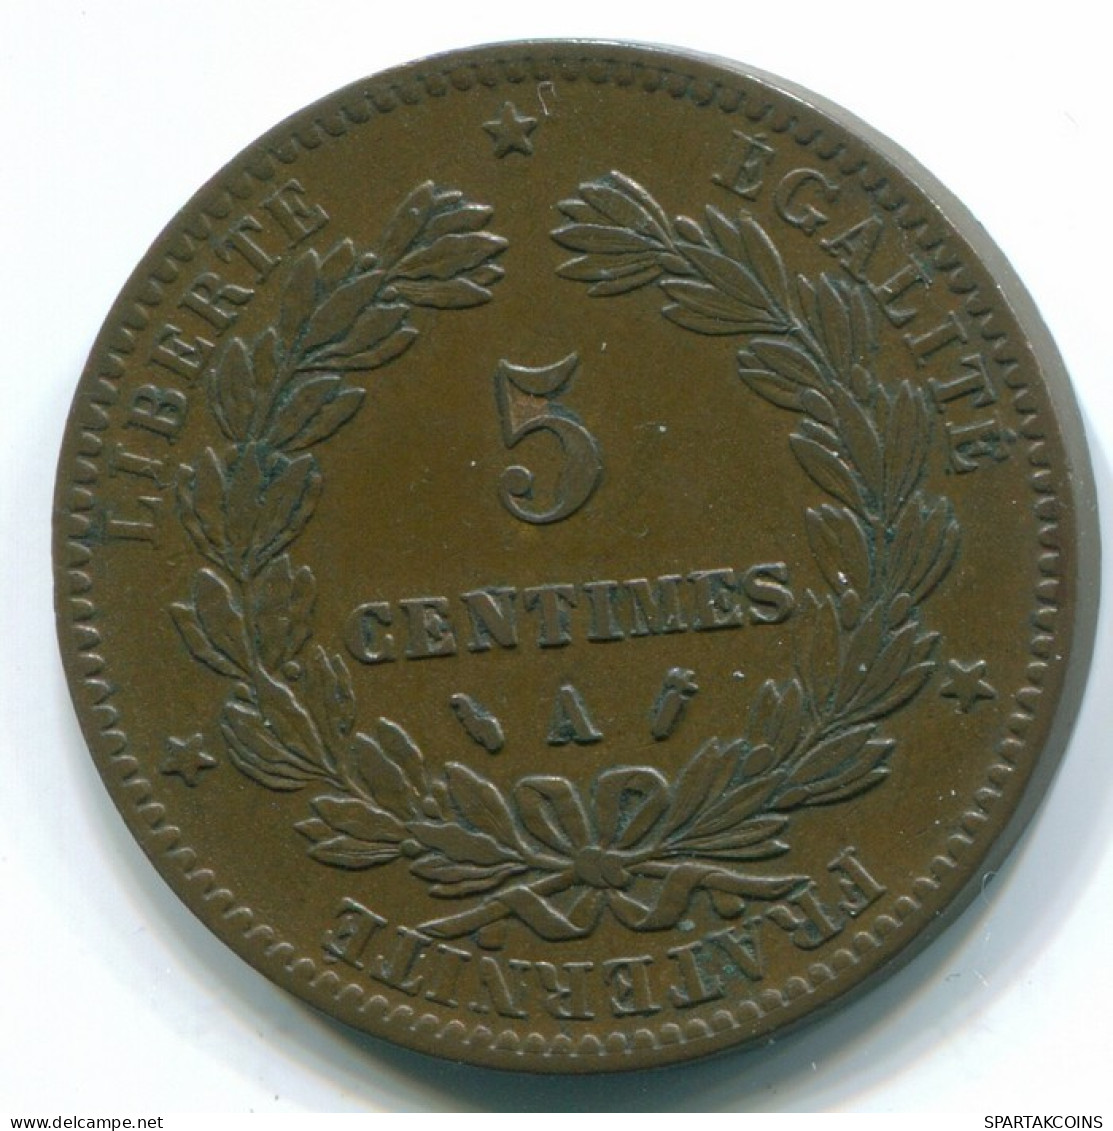 5 CENTIMES 1884 A FRANCE Coin CERES XF #FR1117.38.U.A - 5 Centimes